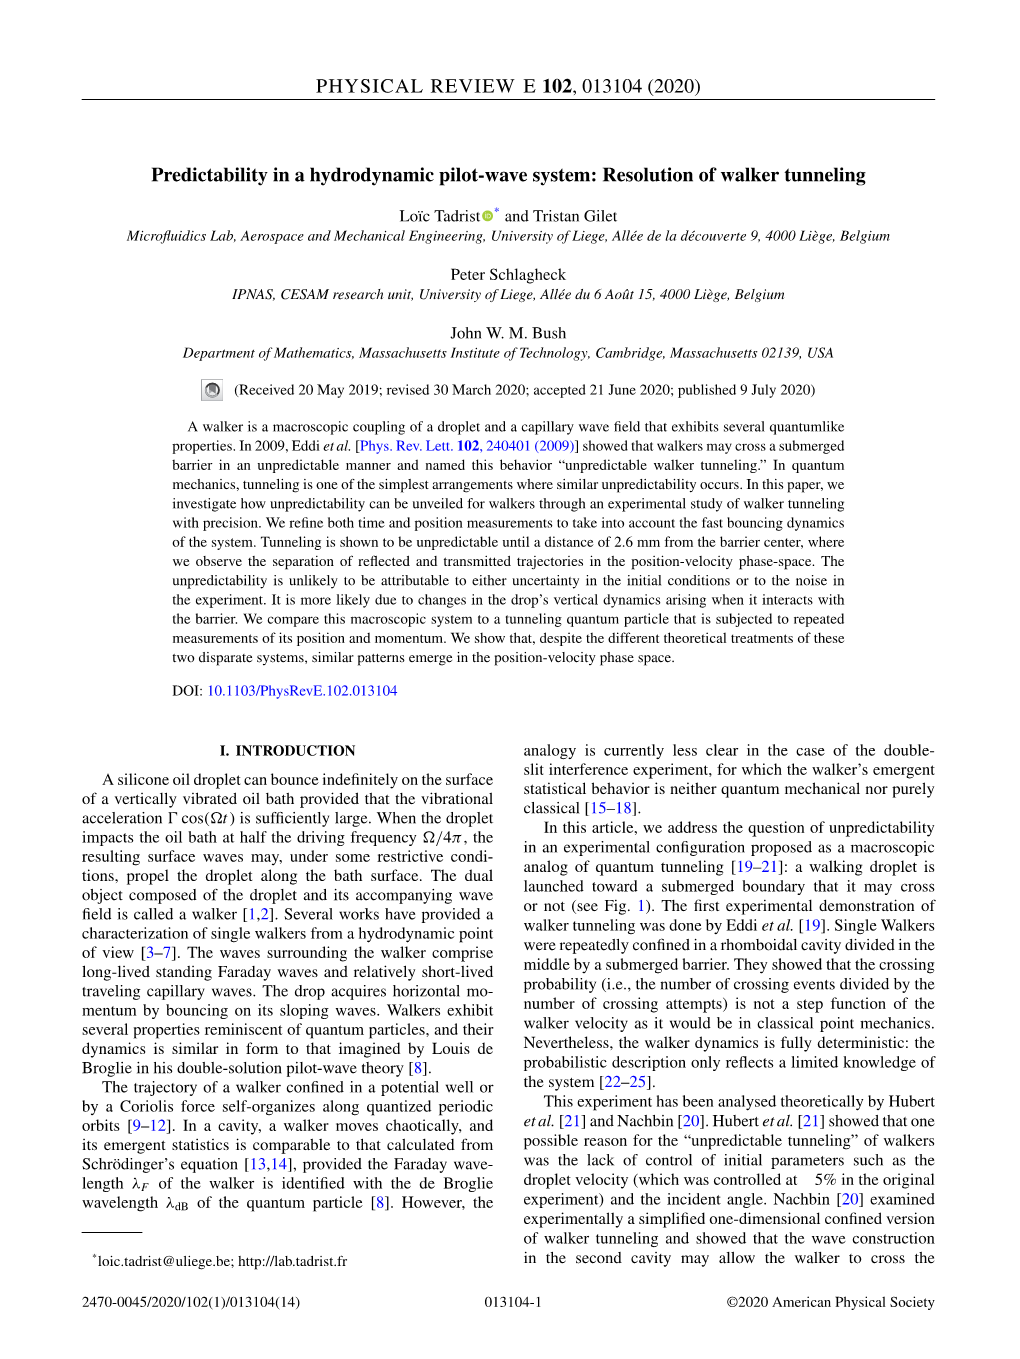 Predictability in a Hydrodynamic Pilot-Wave System: Resolution of Walker Tunneling